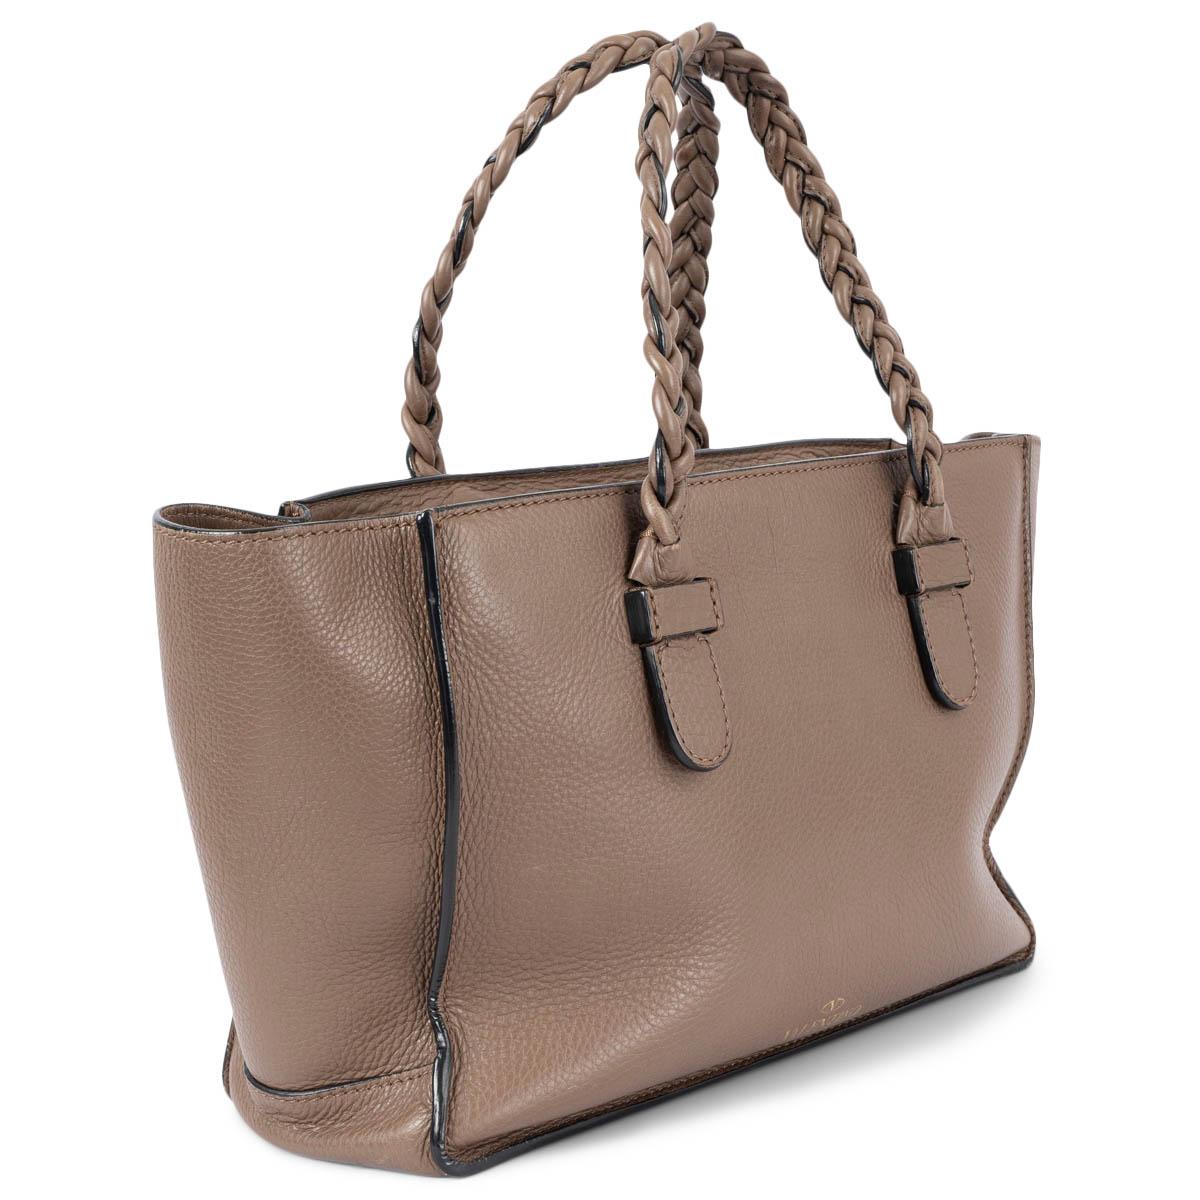 100% authentic Valentino 2014 To Be Cool Small tote bag in dark taupe grained leather. The design features braided leather handles, large sides and a removable pocket. Opens with a top zip and offers a spacious leather interior with zip closure and